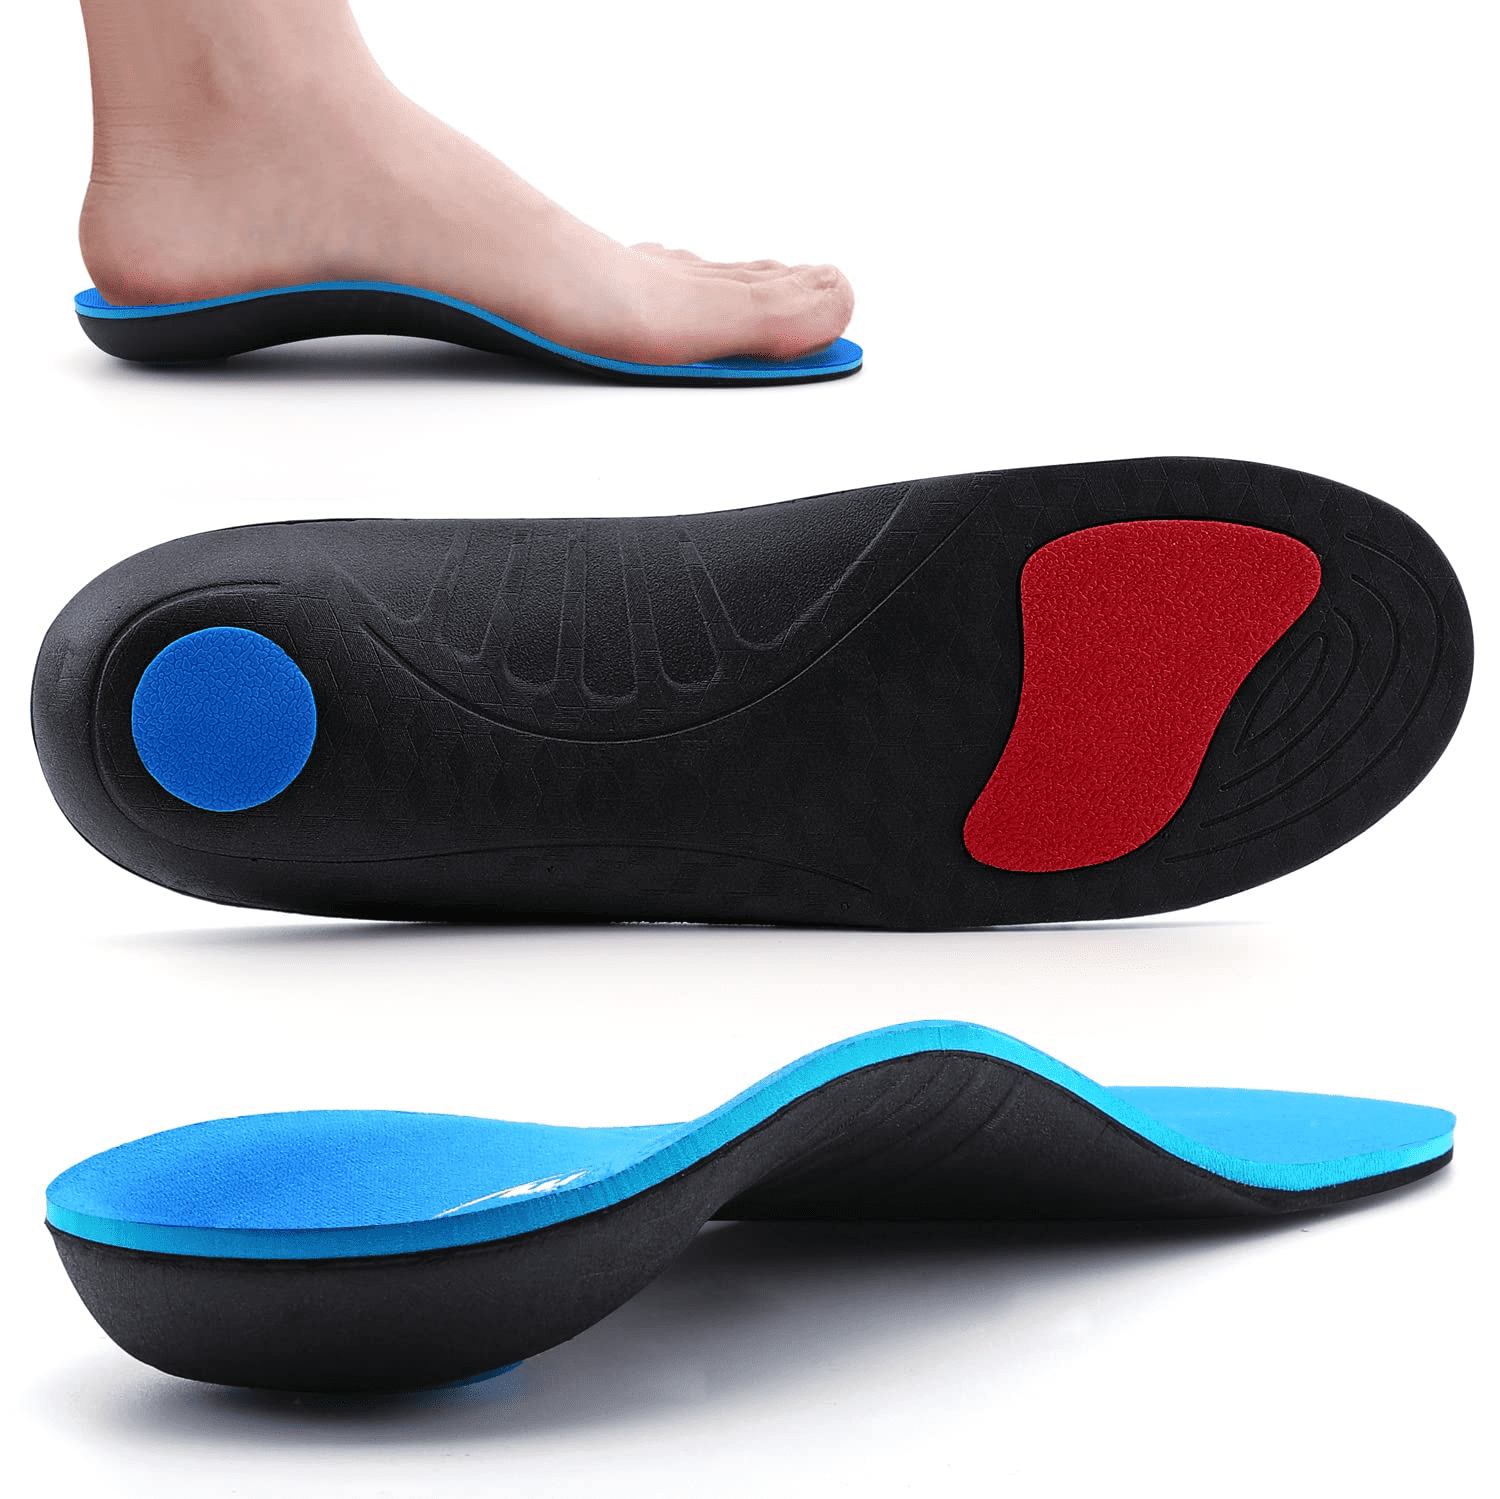 Orthopedic-insole Plantar Fasciitis Insoles Arch Support Orthotics Shoe Inserts 